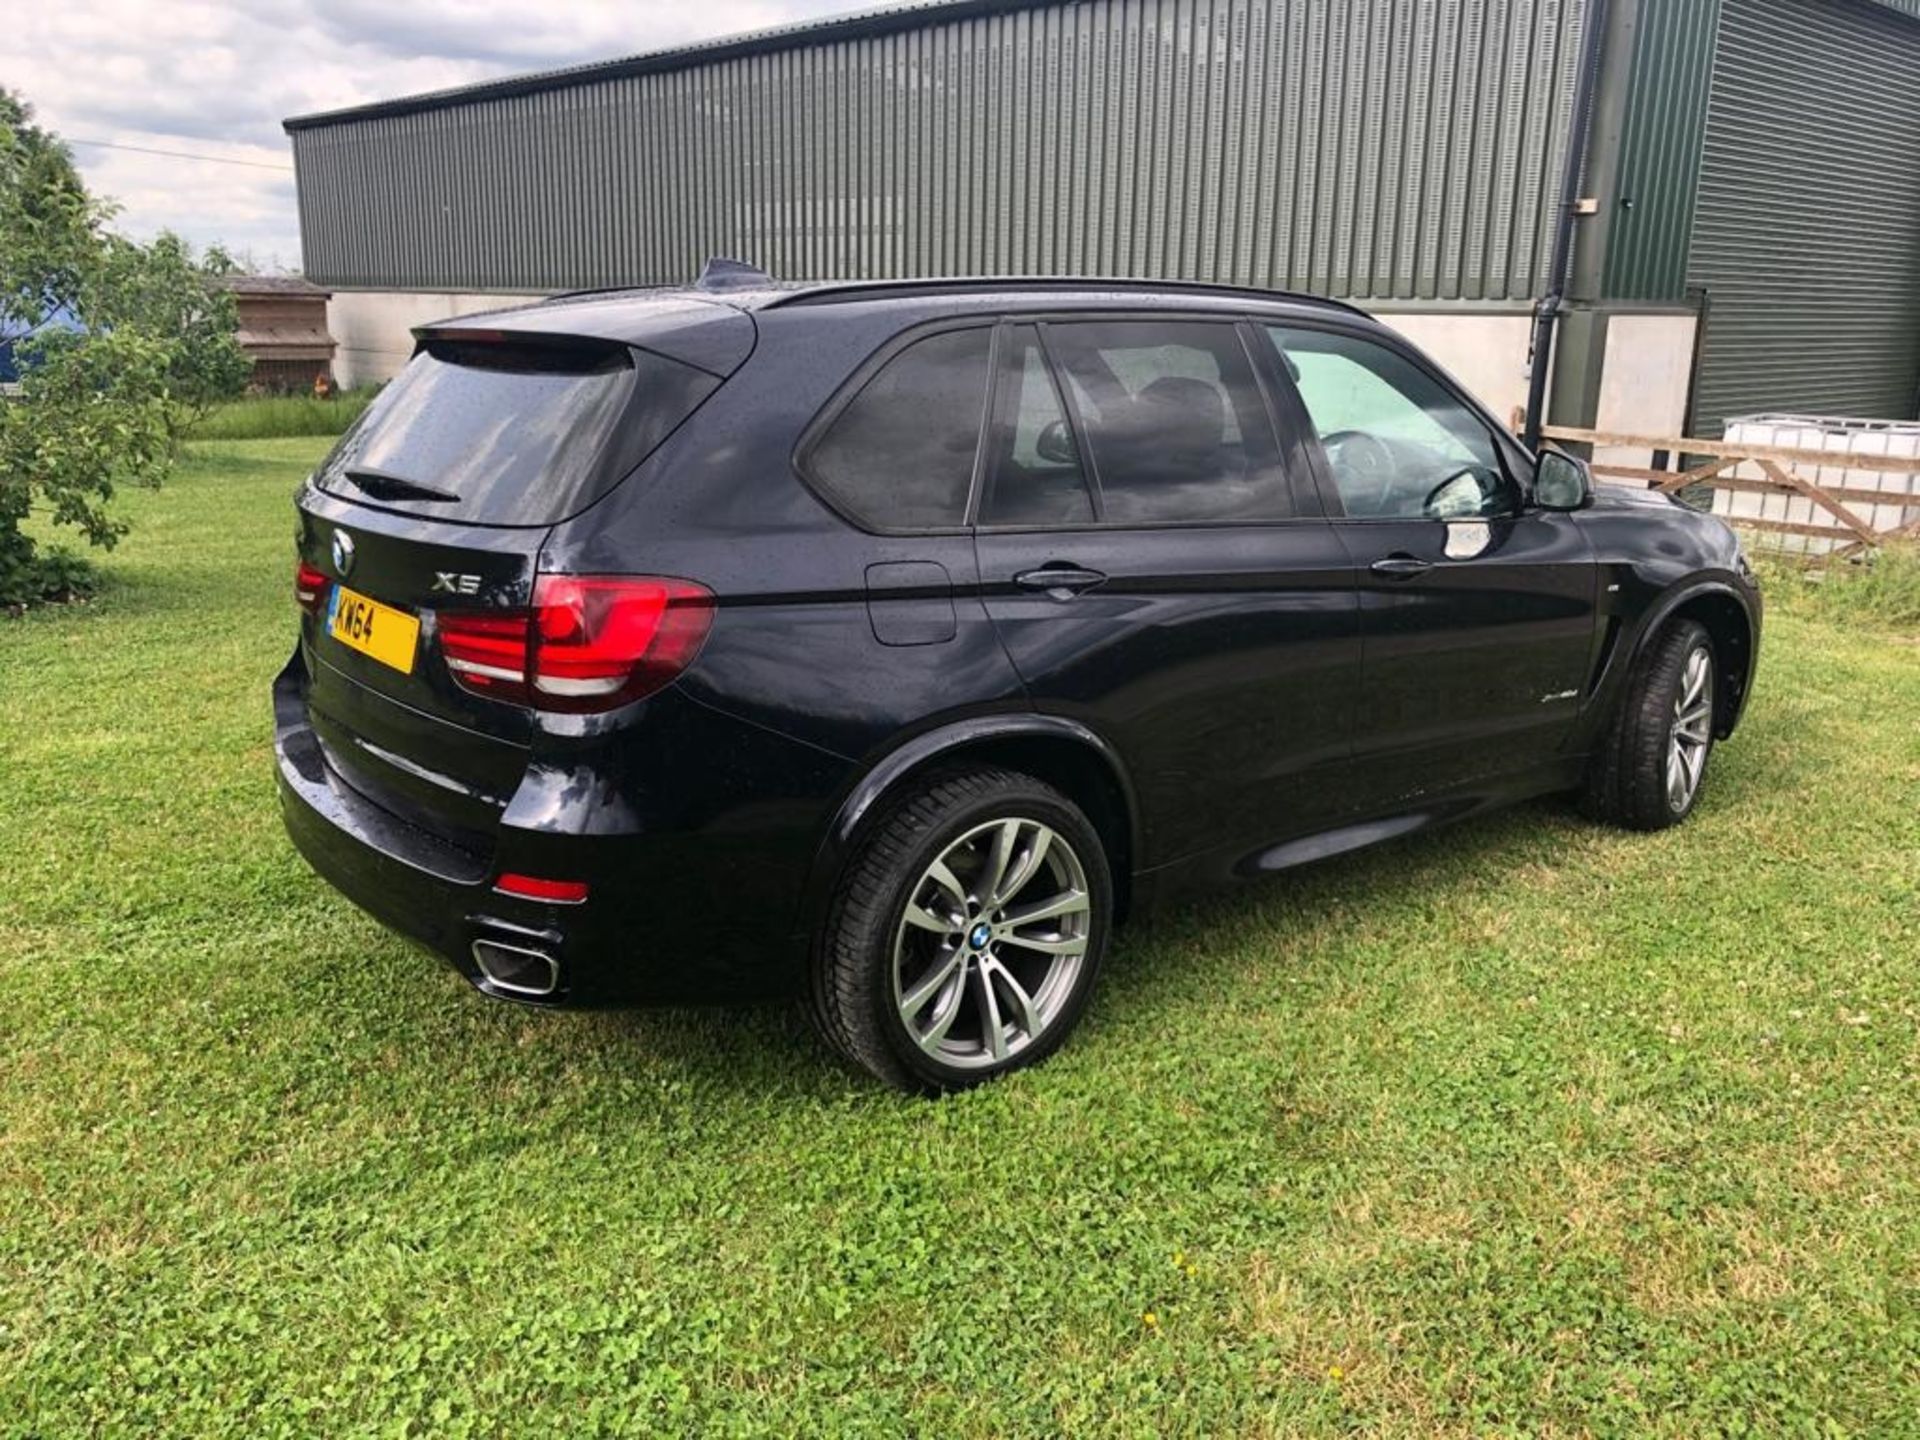 2015/64 REG BMW X5 XDRIVE 40D M SPORT AUTO 3.0 DIESEL, SHOWING 1 OWNER FROM NEW *NO VAT* - Image 5 of 21